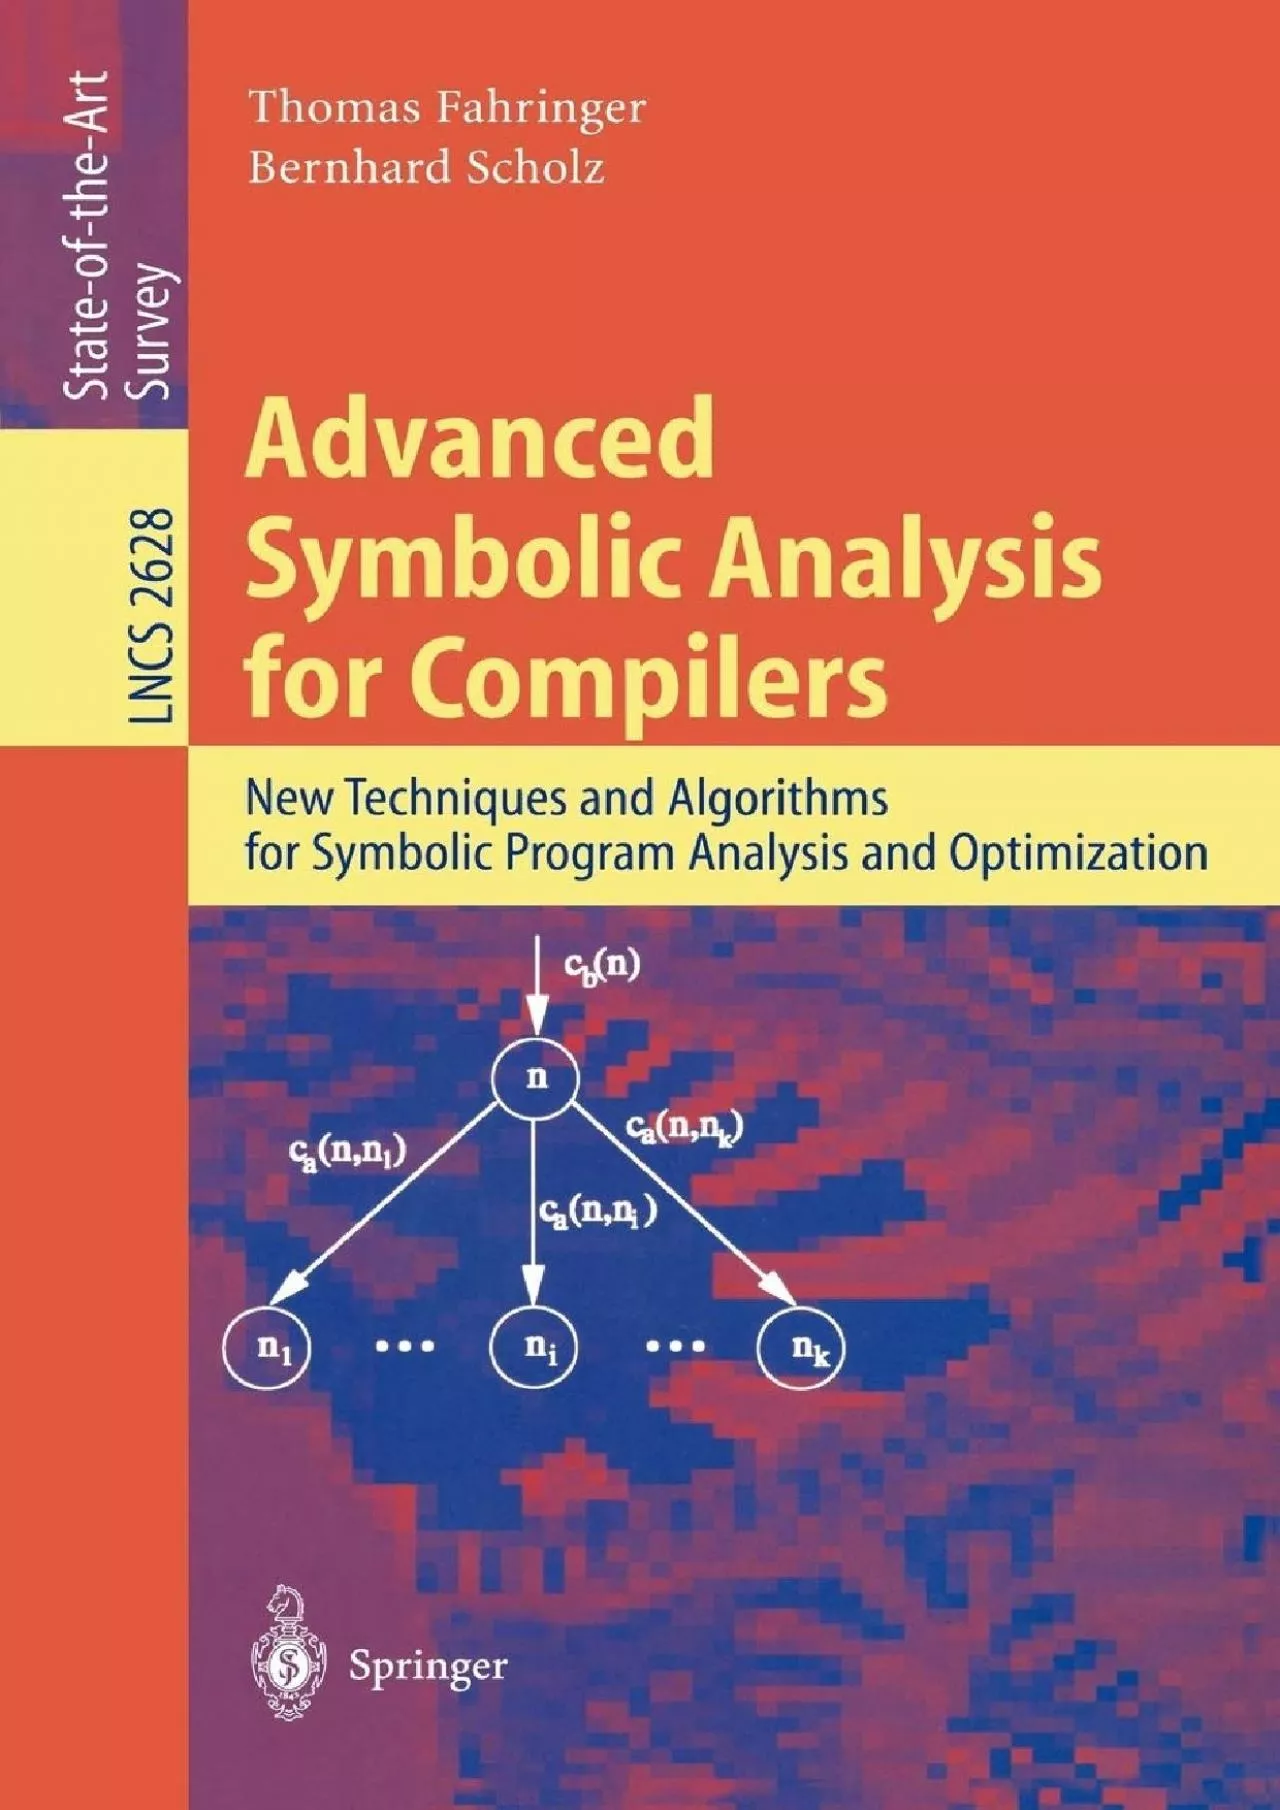 [BEST]-Advanced Symbolic Analysis for Compilers: New Techniques and Algorithms for Symbolic